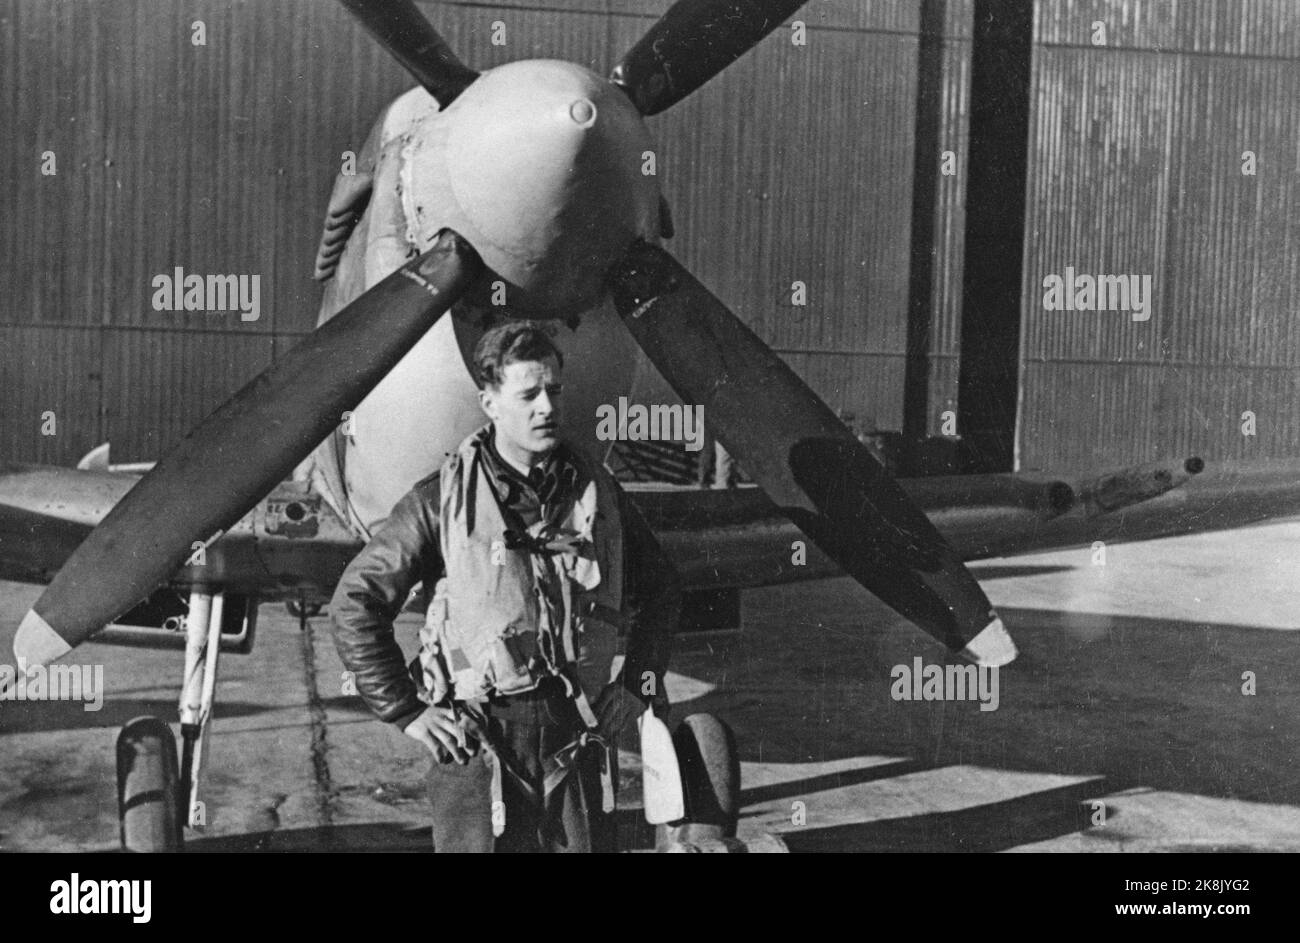 Olav Tradin, Norwegian Flyer who crashed in Skagerak with a Norwegian Spitfire flight on May 10, 1949. Photo; Ntb Stock Photo